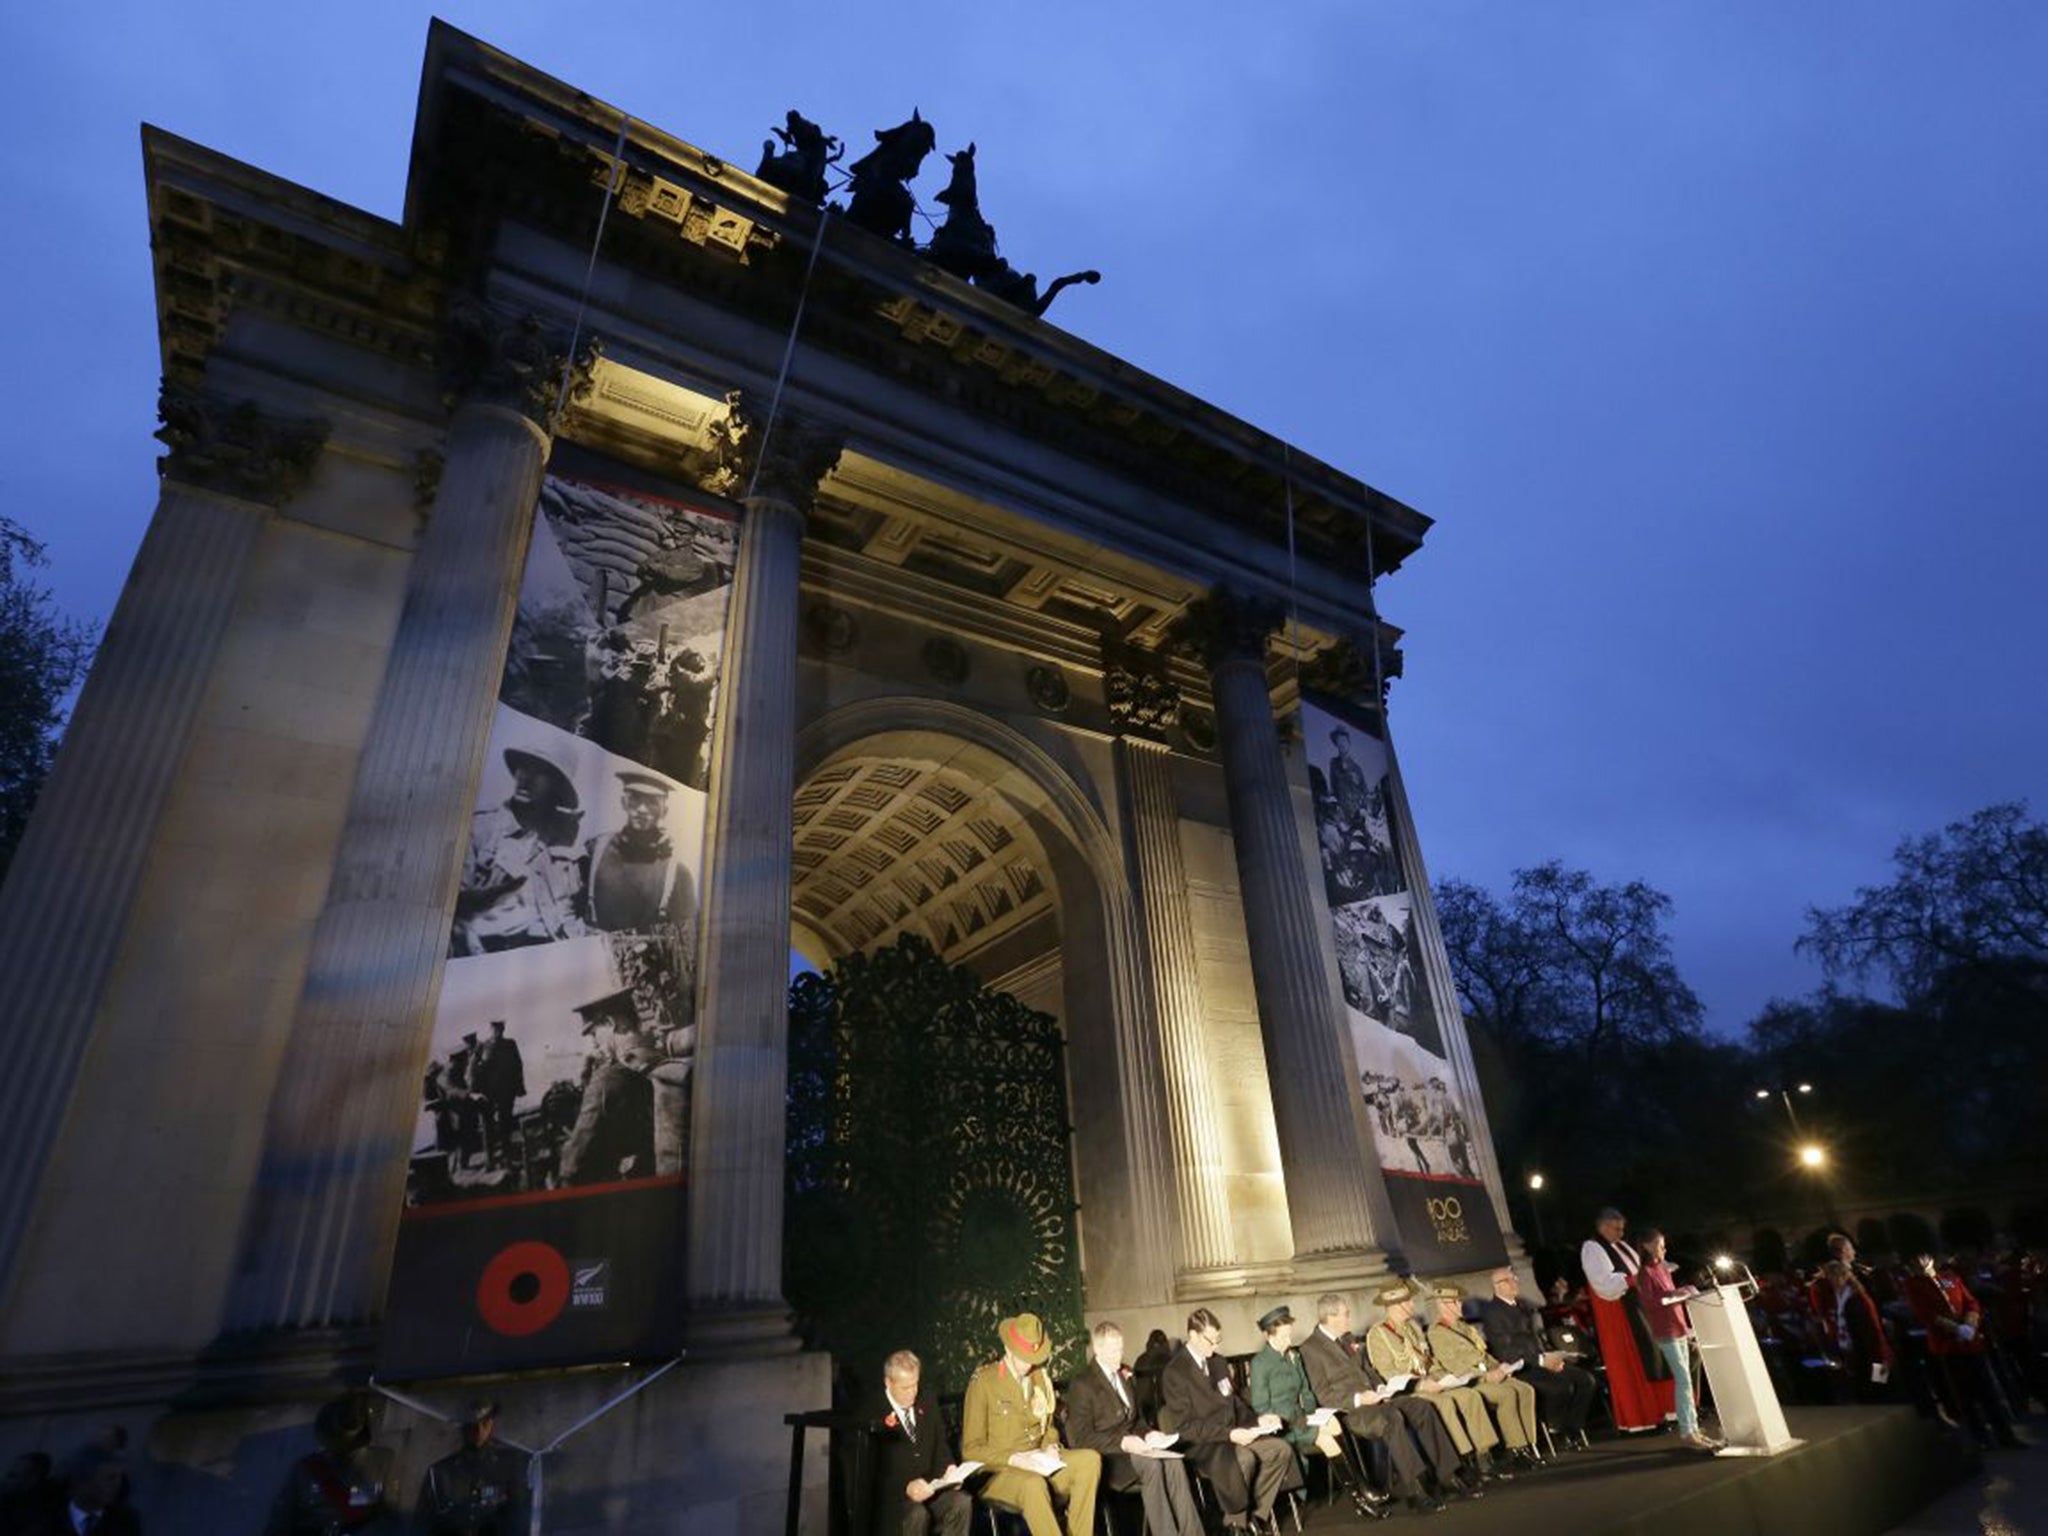 Prayers at Saturday's Anzac Day service at London’s Wellington Arch